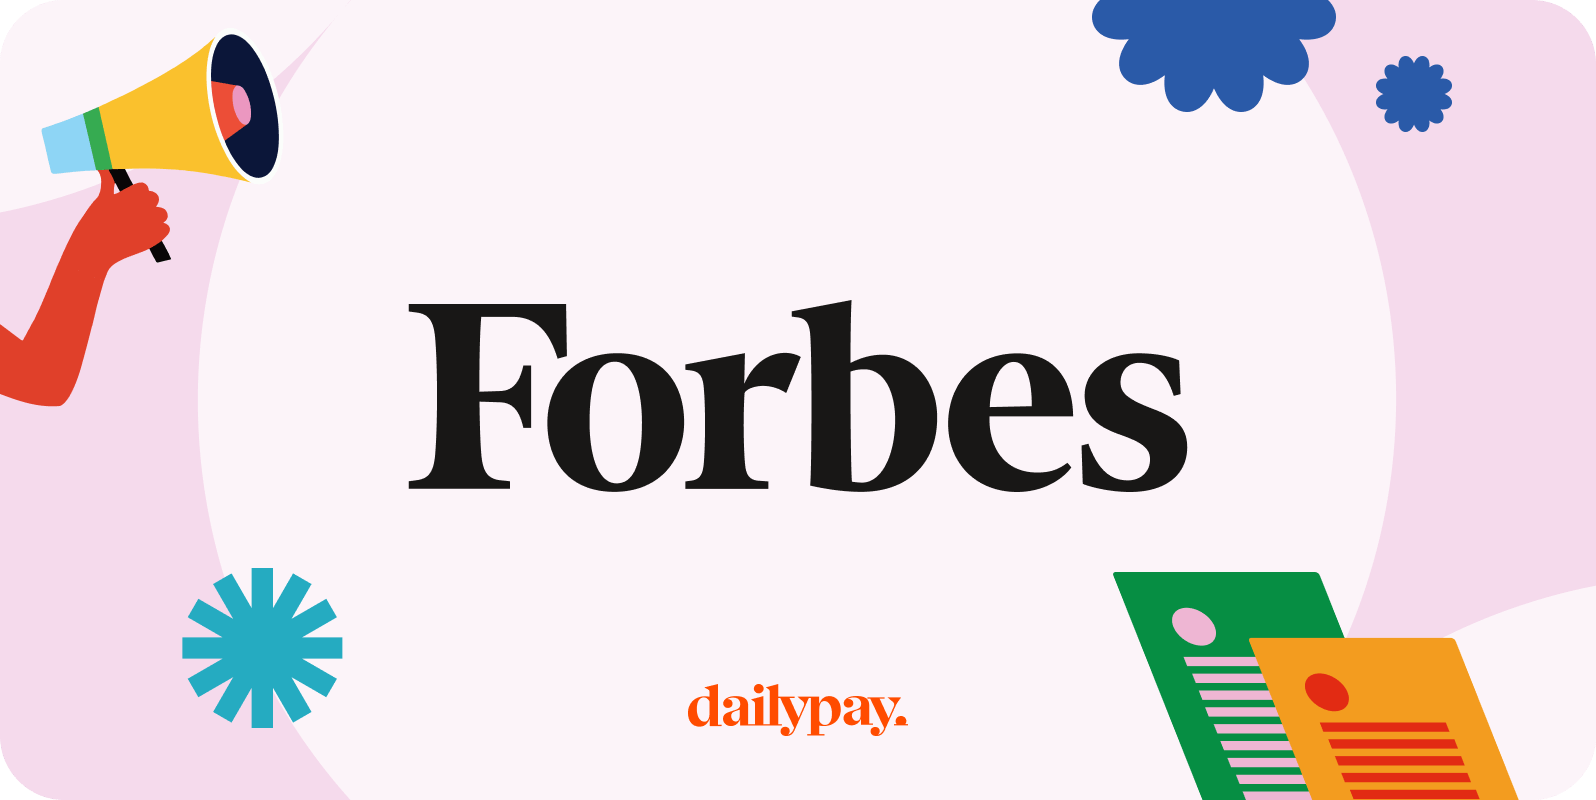 A graphic featuring the text "Forbes" in the center. Surrounding elements include a hand holding a megaphone, colorful shapes, and documents. The "dailypay." logo is at the bottom.